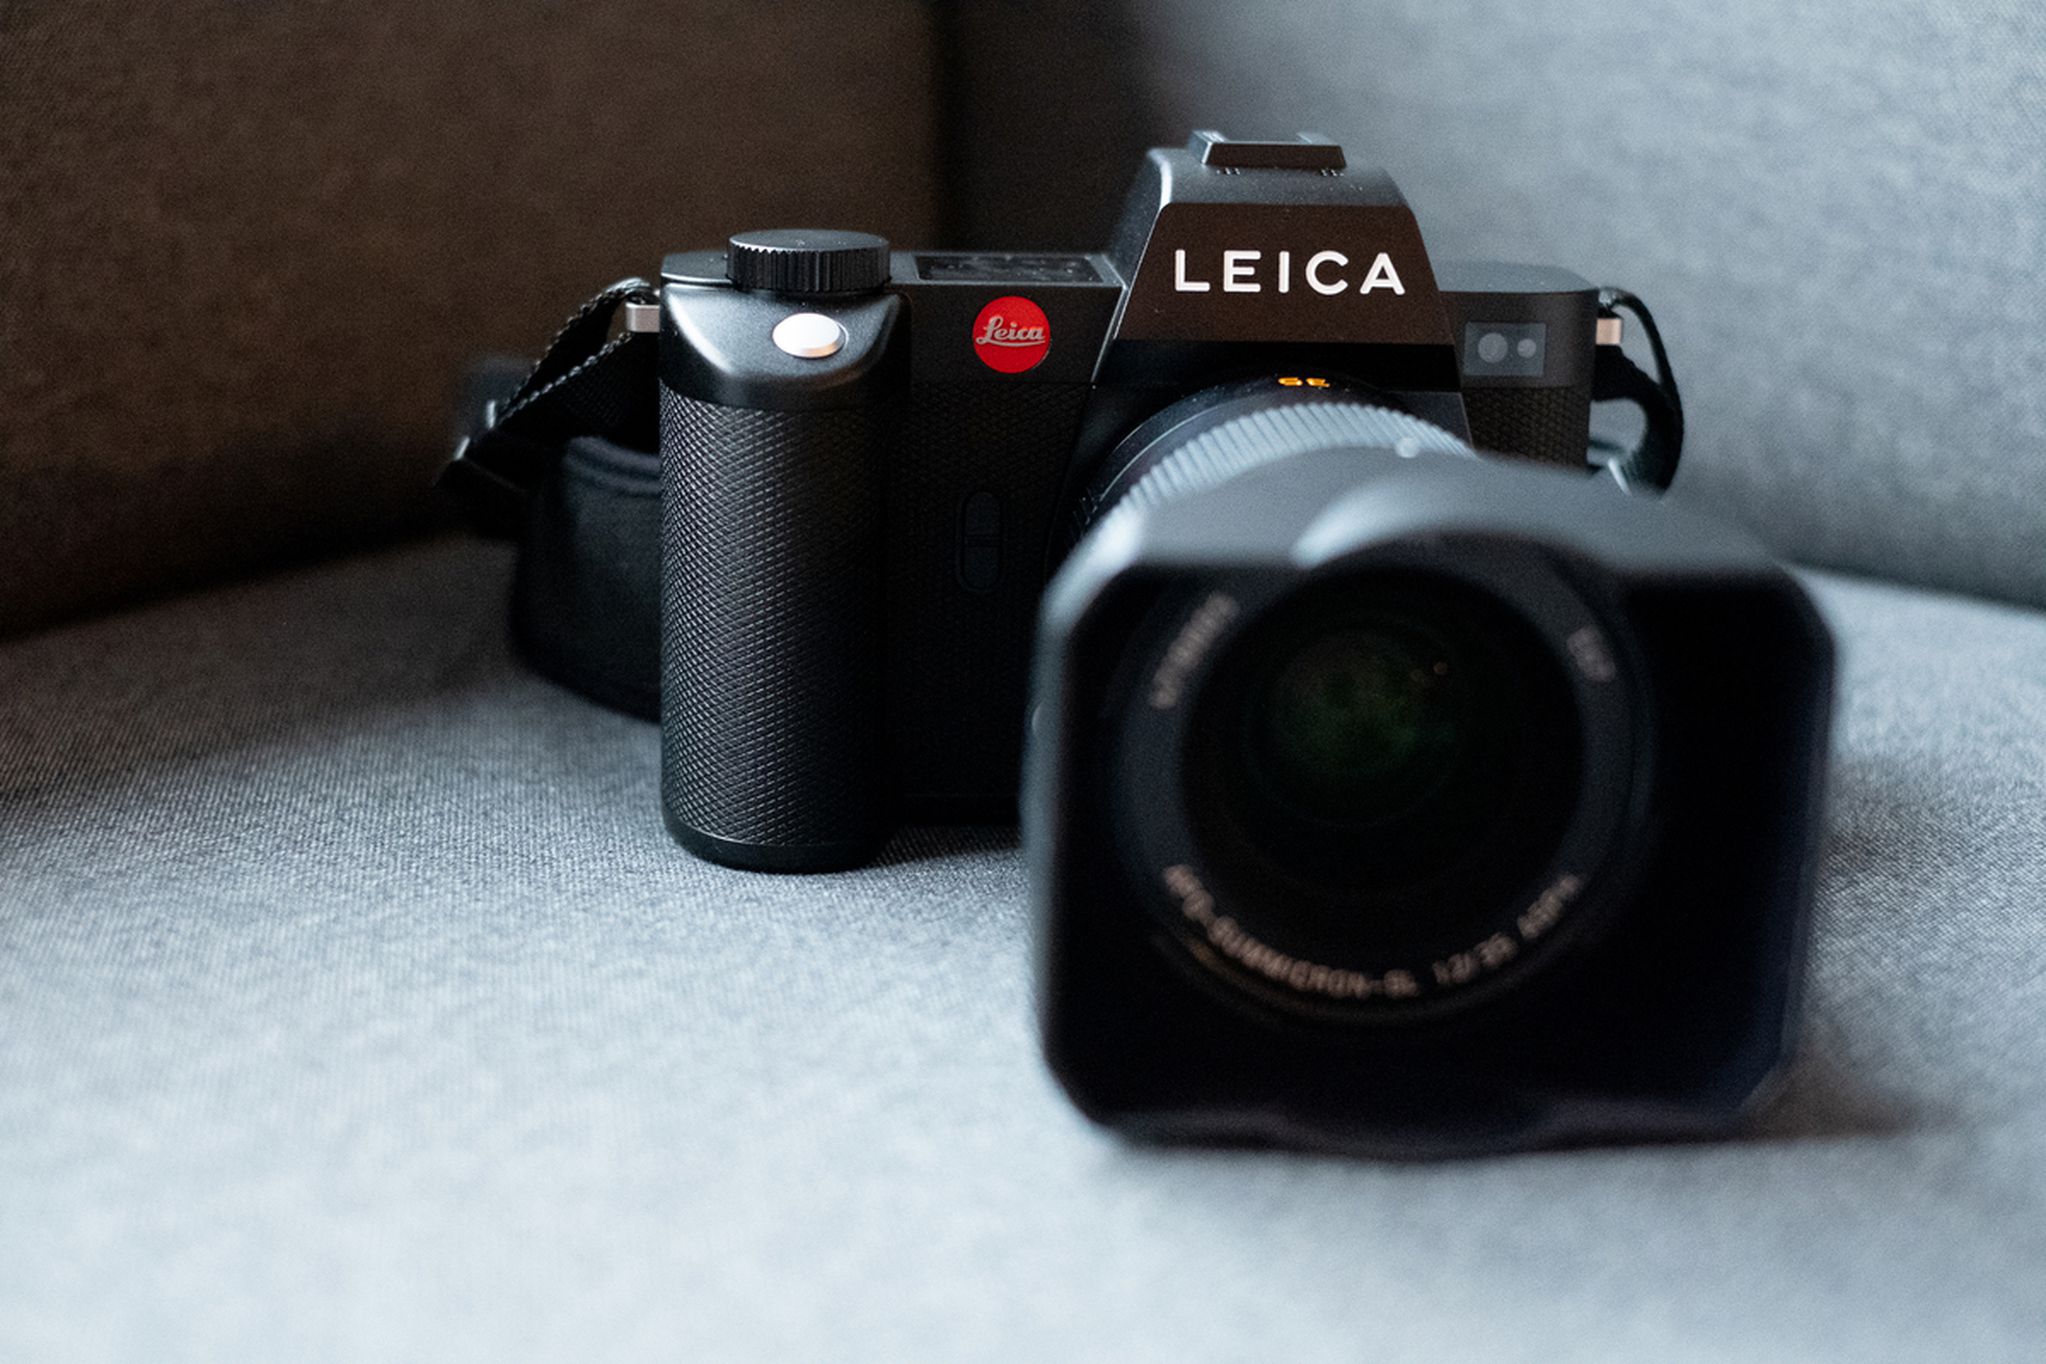 First shots with Leica’s 47-megapixel SL2 mirrorless camera